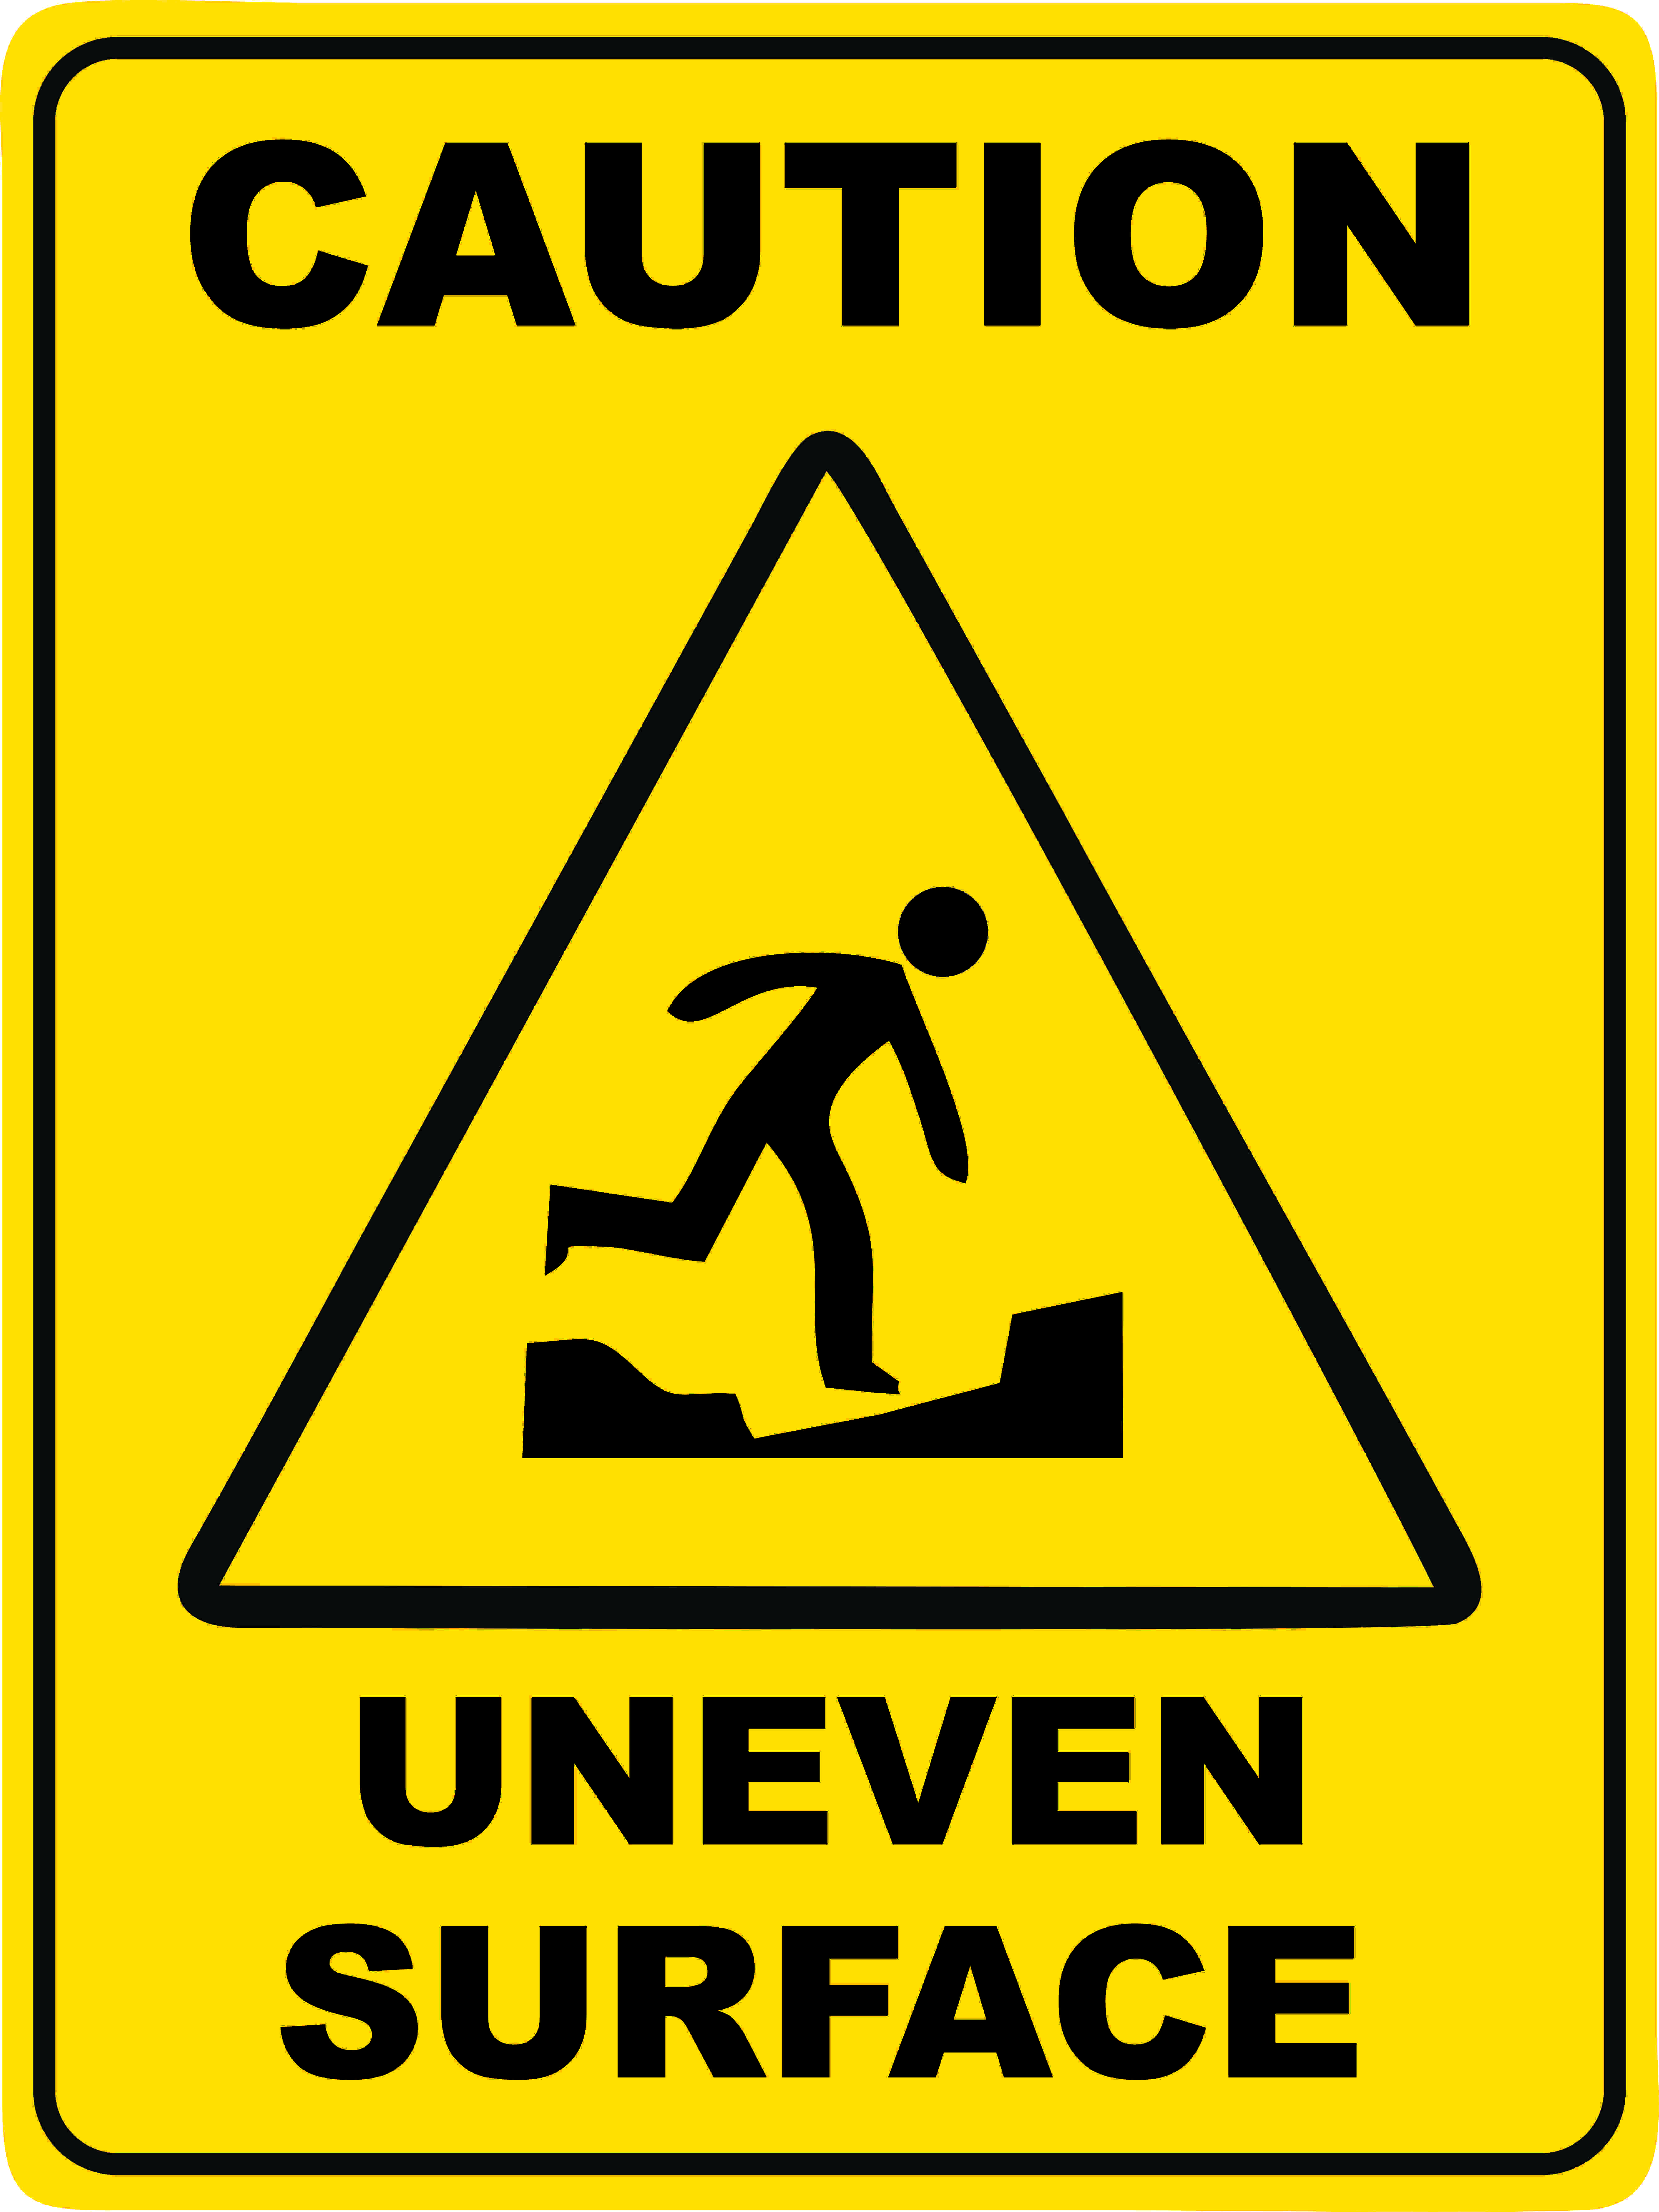 UNEVEN SURFACE | Discount Safety Signs Australia